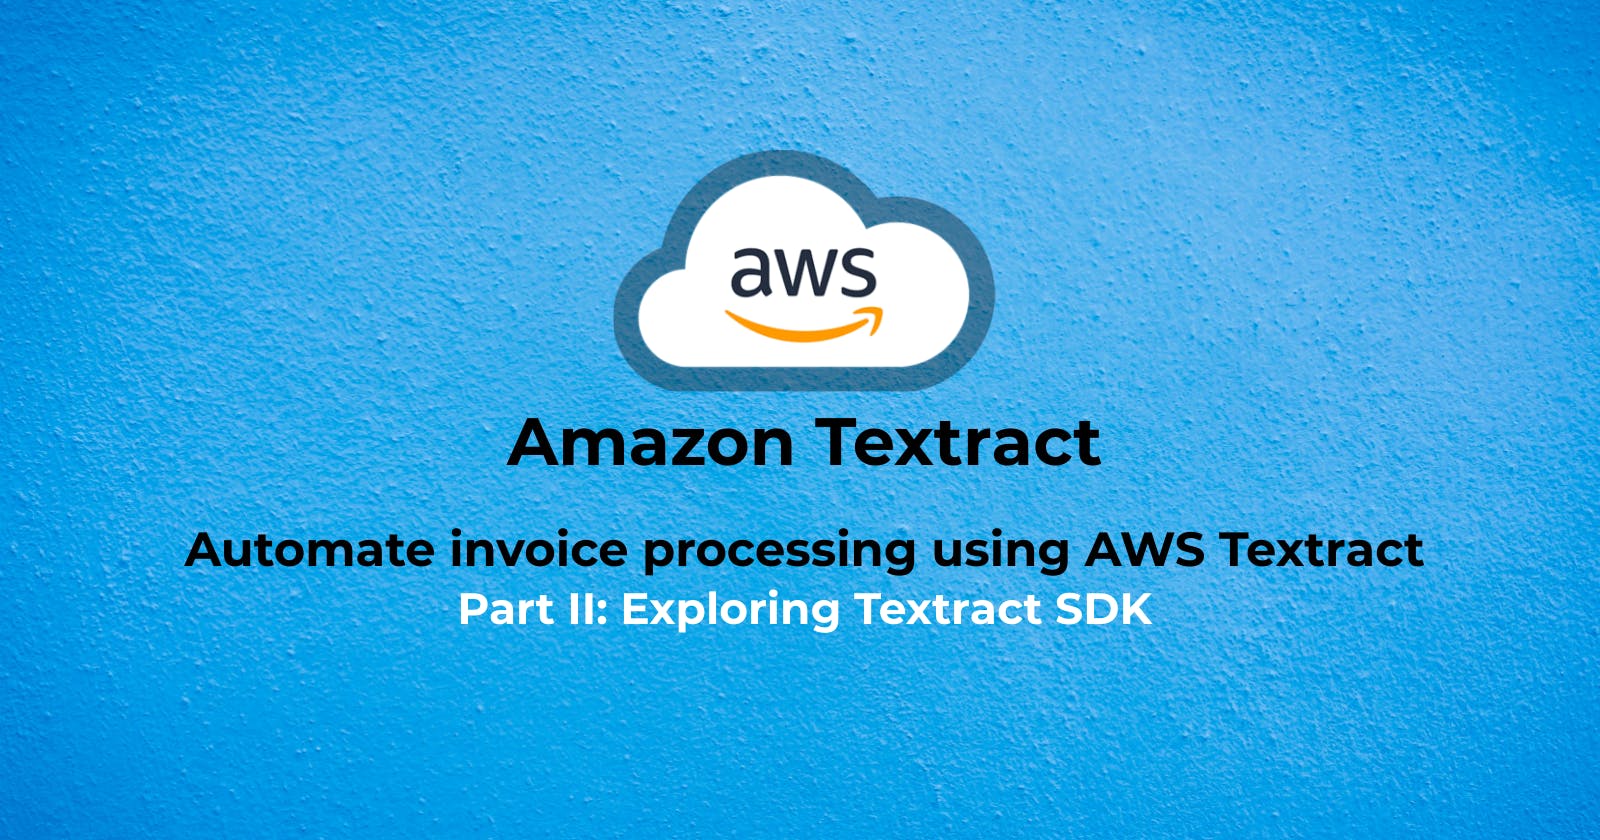 Part II: Automate invoice processing using AWS Textract